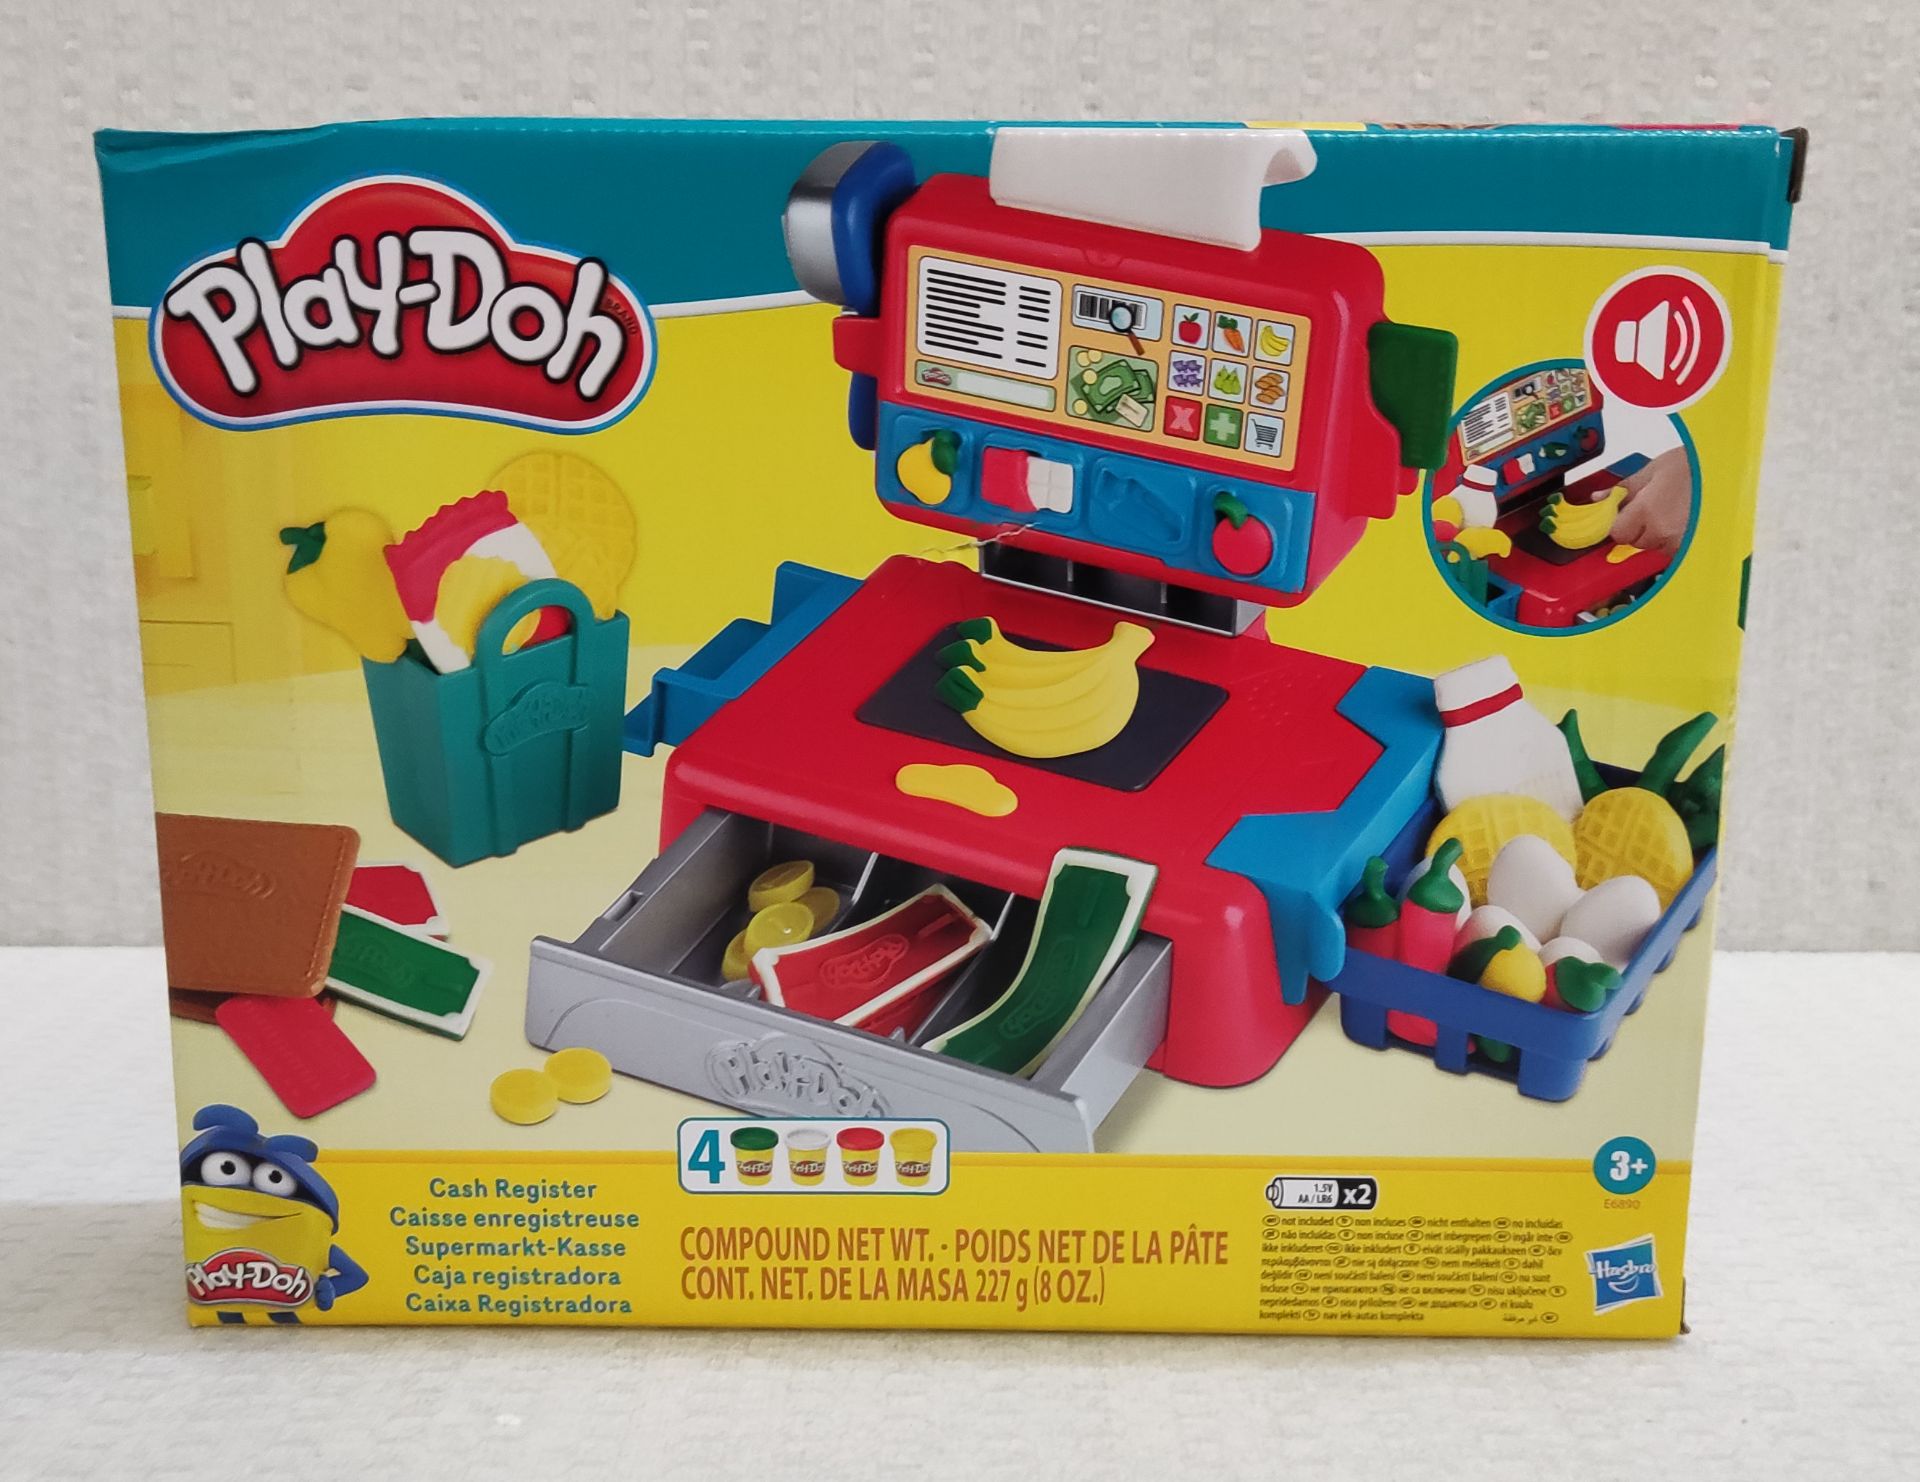 1 x Play-Doh Cash Register - New/Boxed - Image 2 of 5